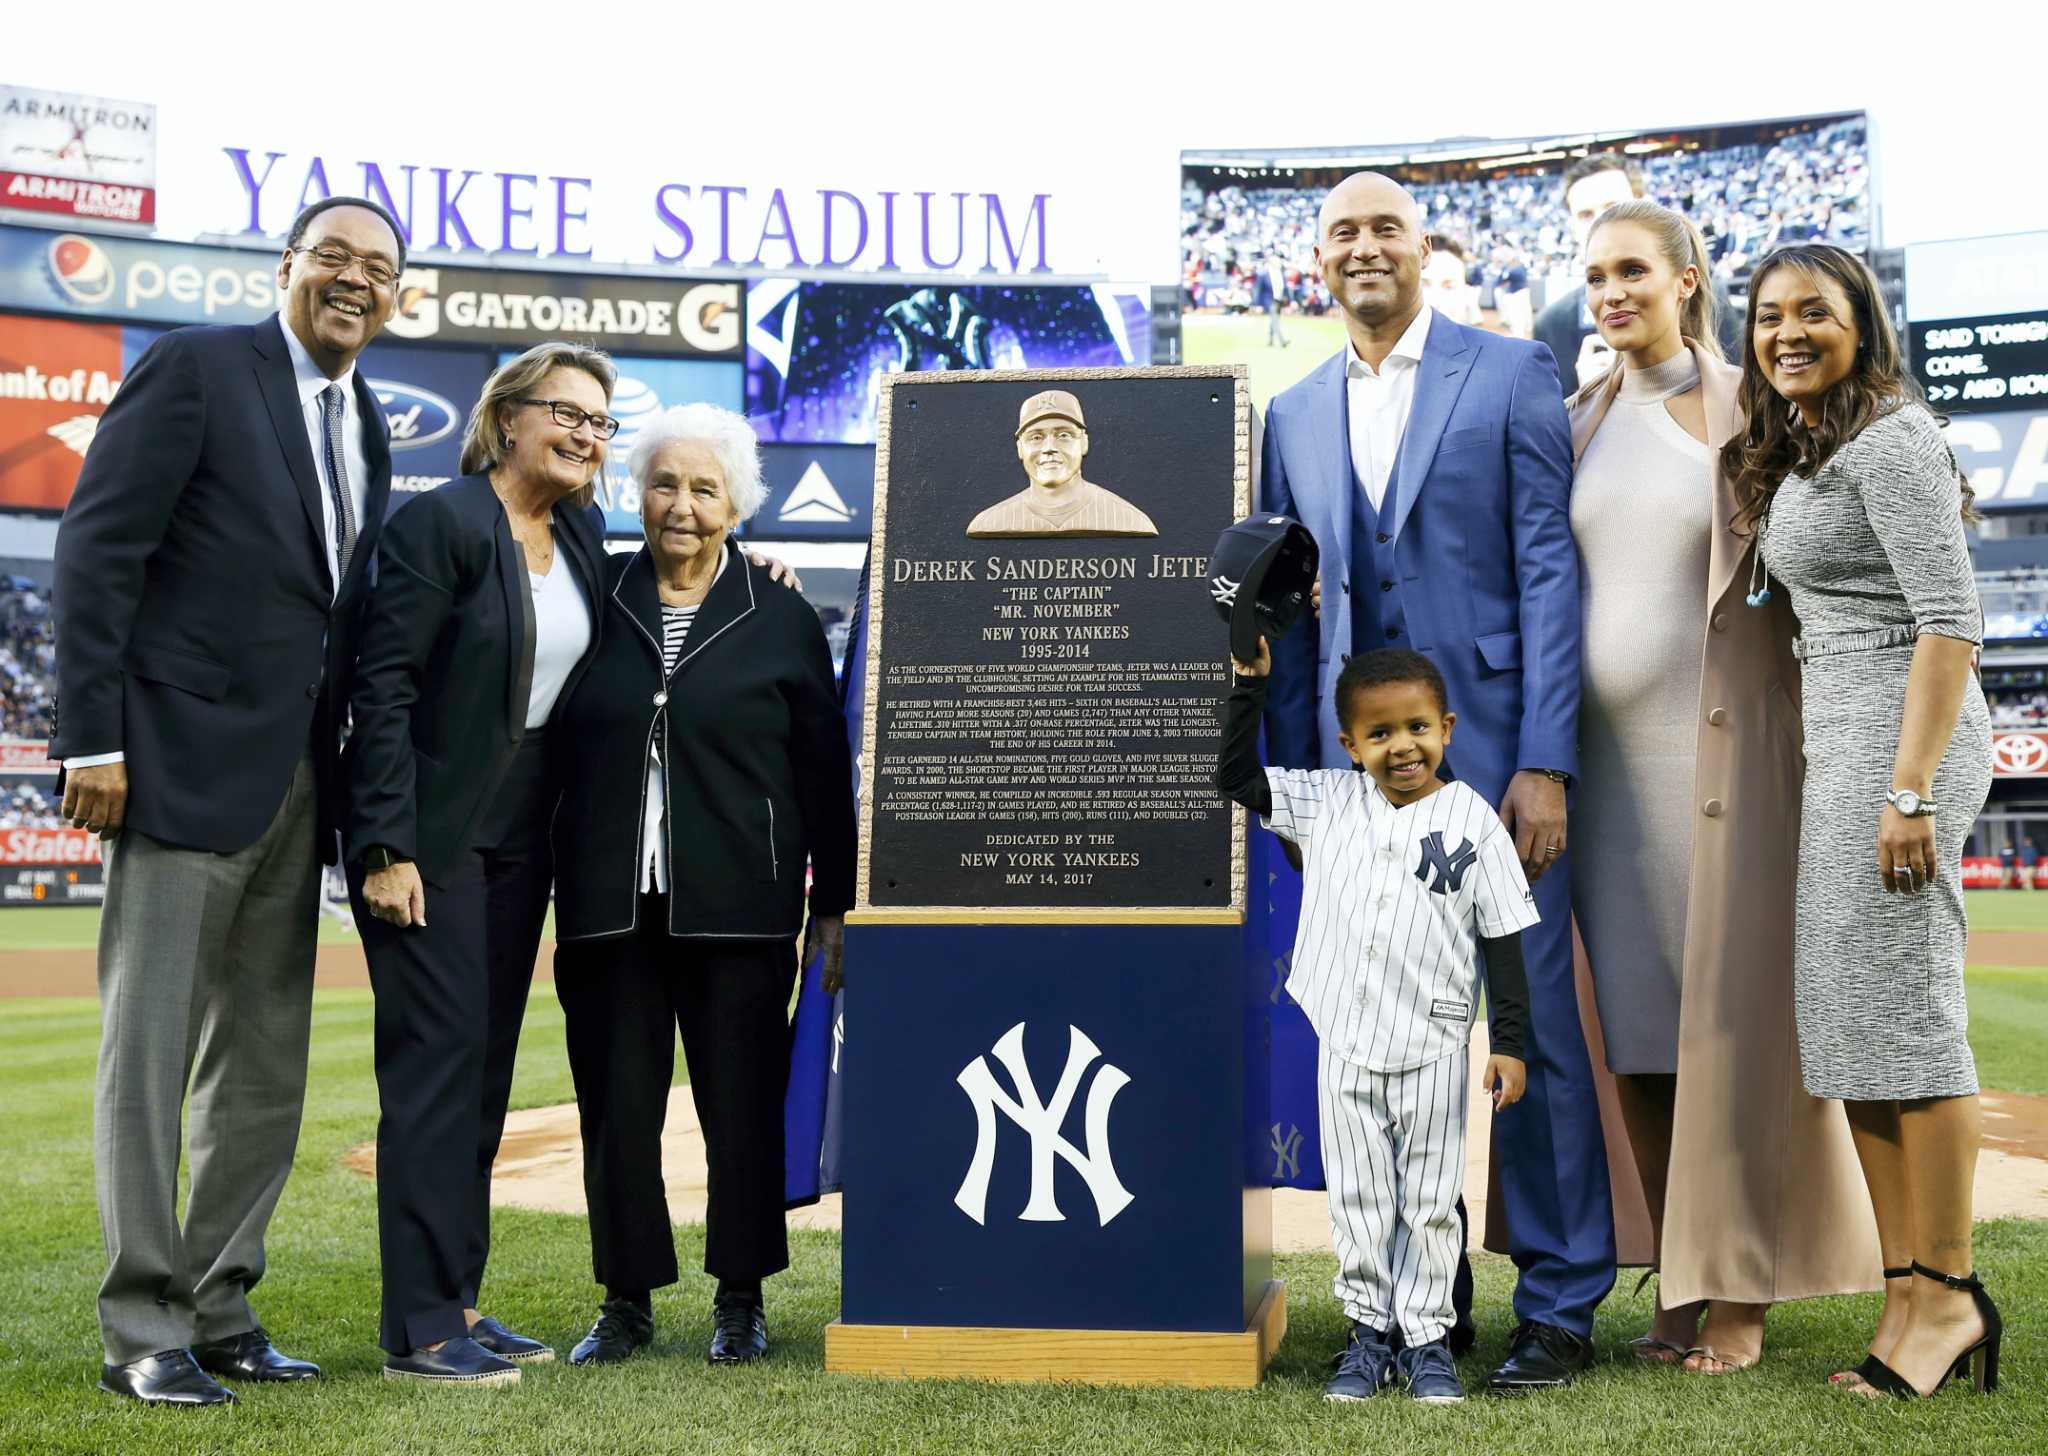 Derek Jeter, Out of Pinstripes and in Monument Park, Can Finally Reflect -  The New York Times